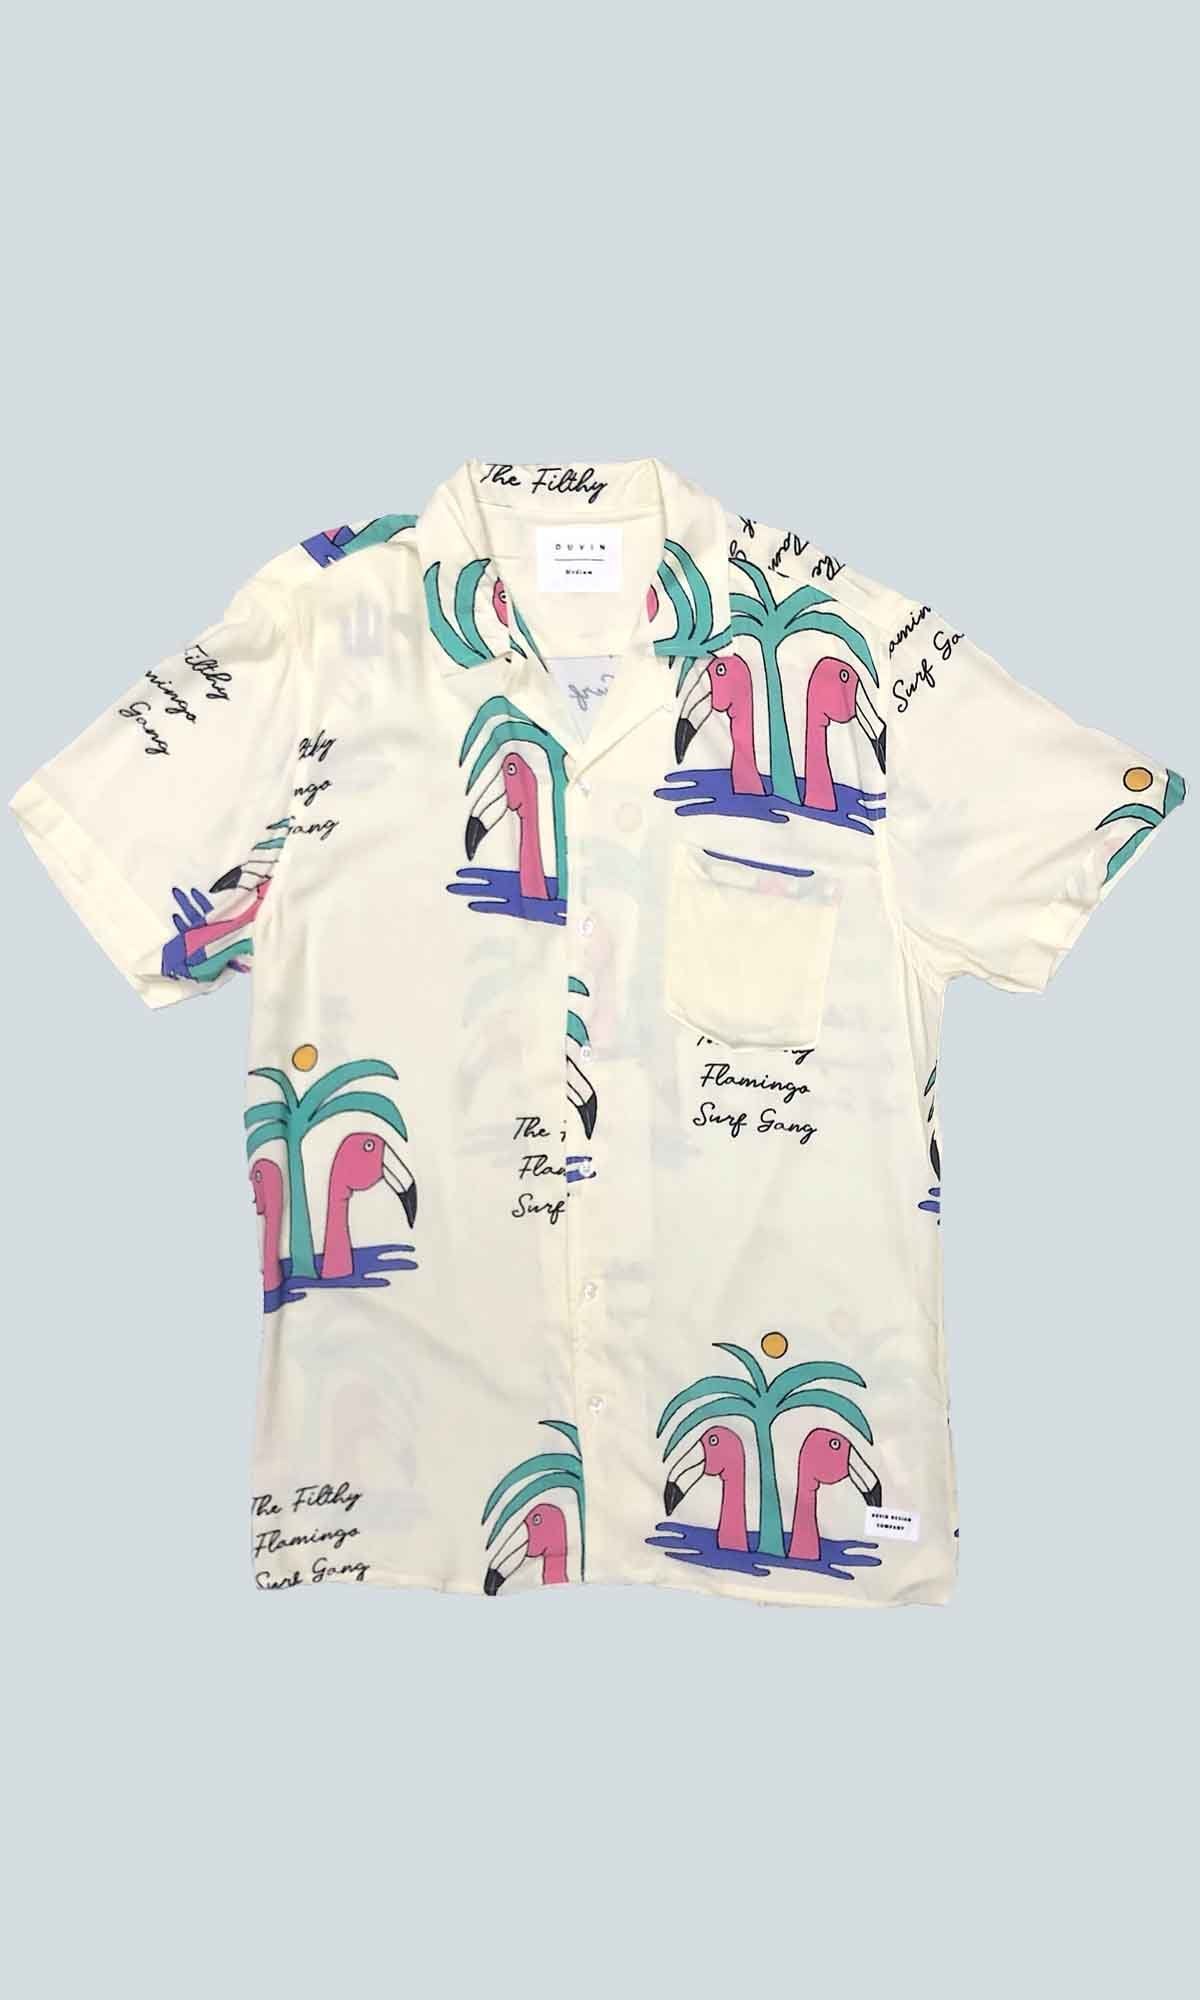 10 Designer Bowling Shirts That Are Right Up Your Alley For Summer